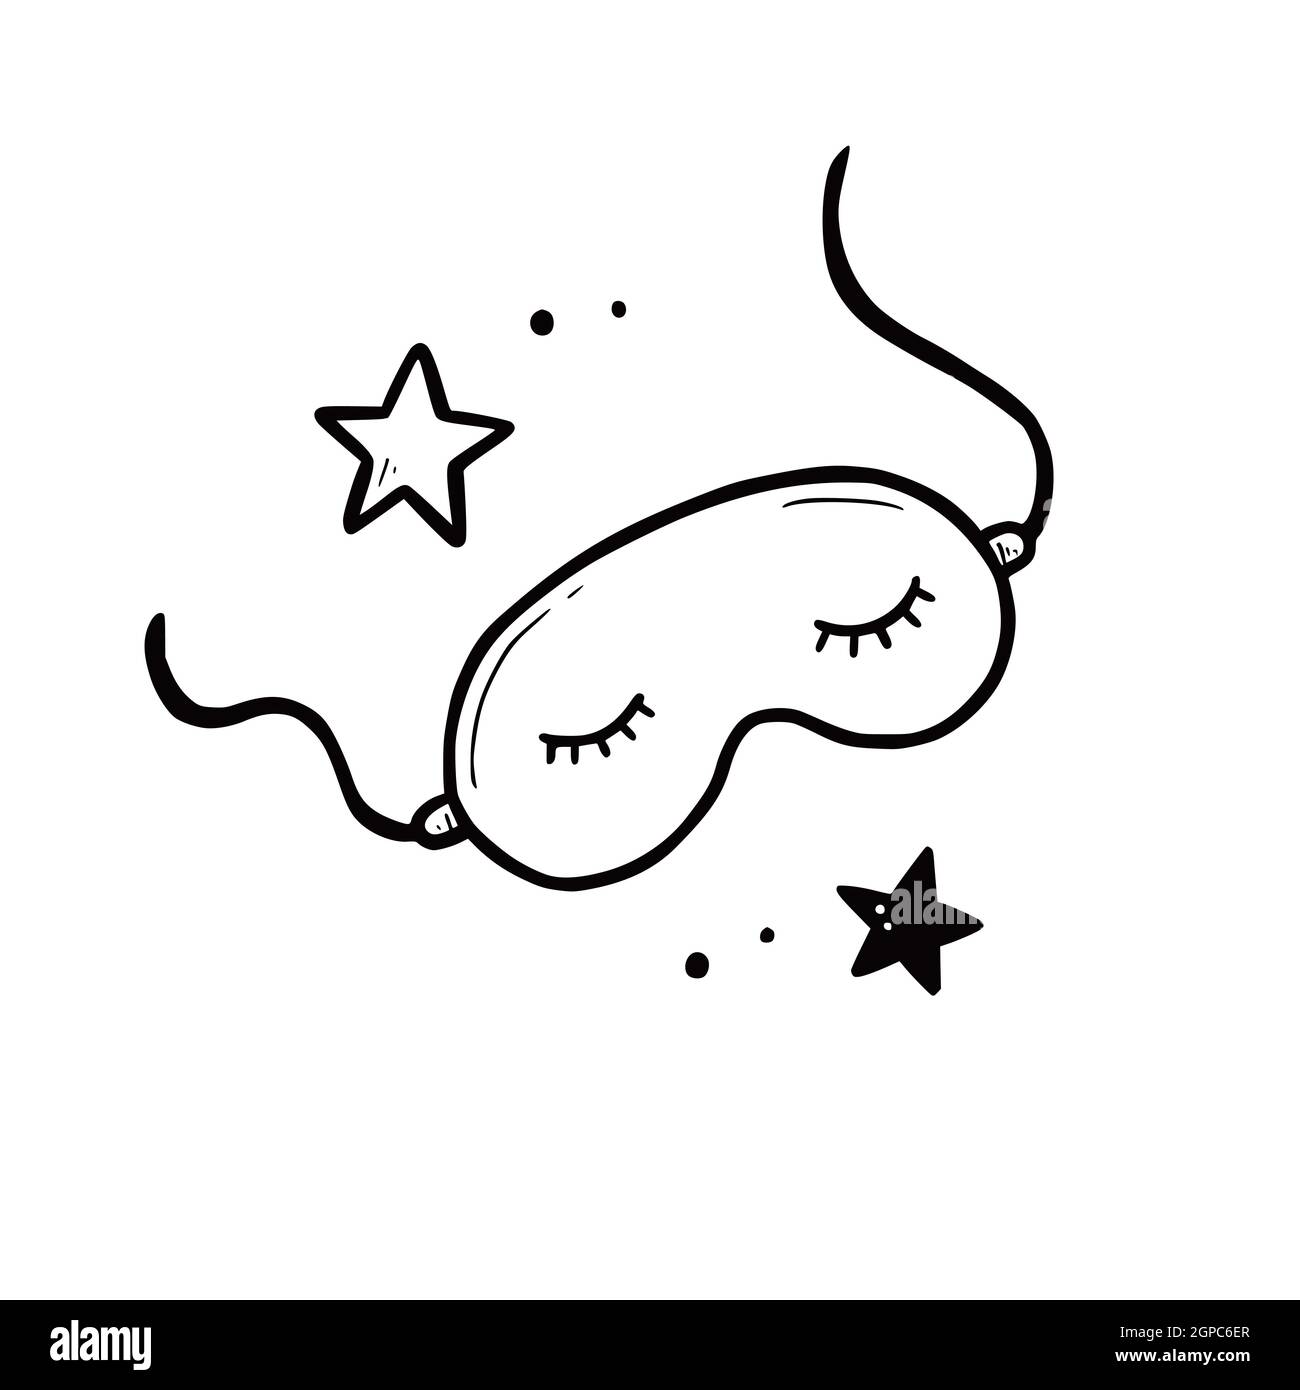 Sleep Mask With Eyes. Design Element With Outline. Doodle, Hand-drawn.  Black White Vector Illustration. Isolated On A White Background. Royalty  Free SVG, Cliparts, Vectors, And Stock Illustration. Image 171627539.